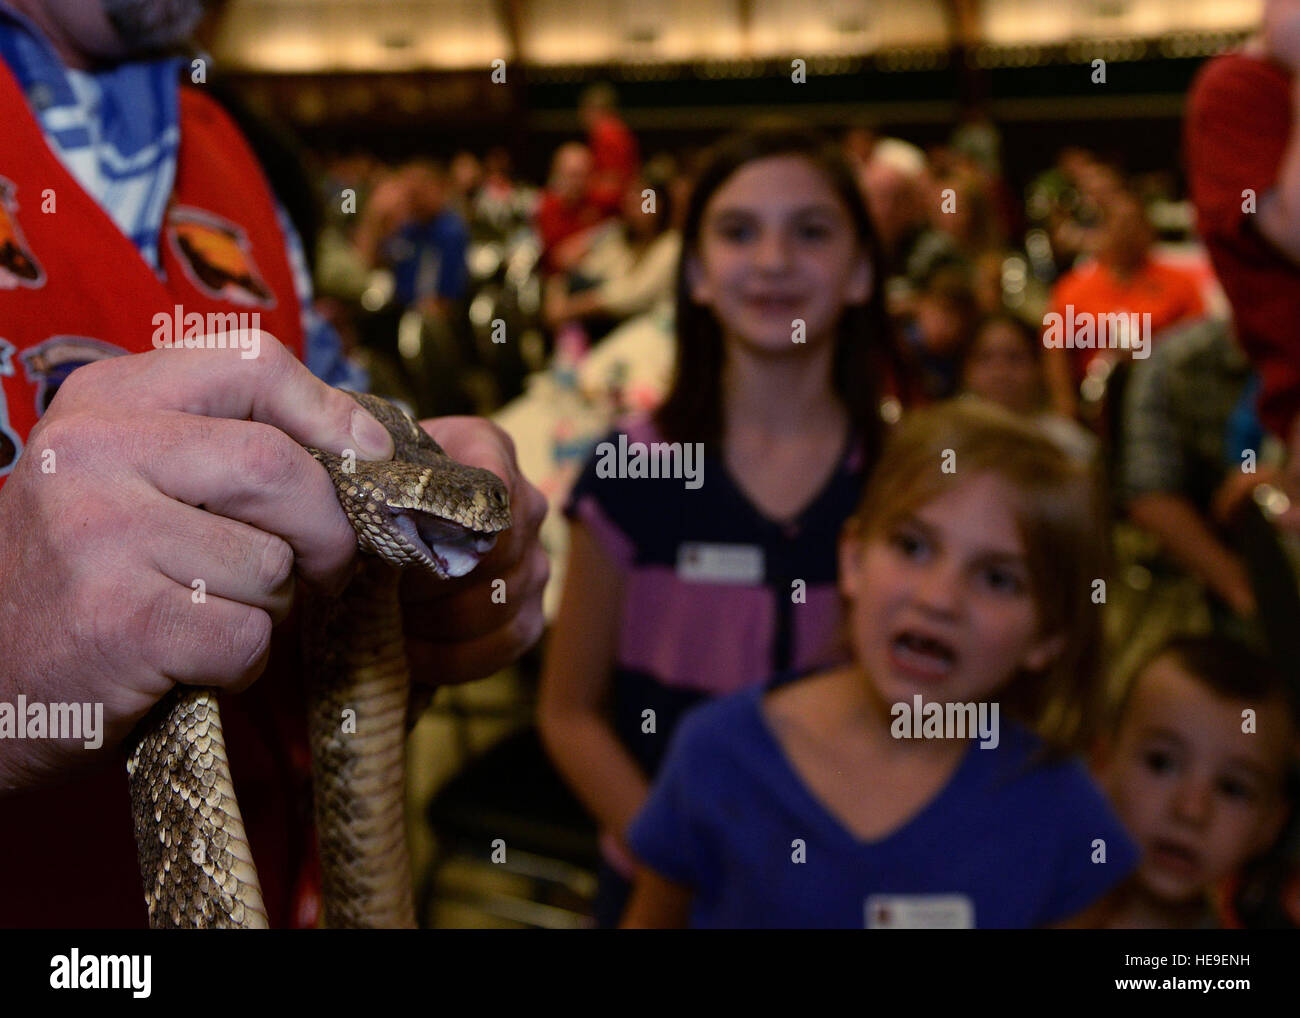 A group of children gather around a rattlesnake on display at a Committee of 100 Dinner inside the Altus High School auditorium, March 30, 2015. Fang Masters from Mangum subdued the snakes and posed for pictures to gain awareness for the 50th annual Rattlesnake Derby, as well as to educate newcomers to Altus on the area’s history with the snakes.  Airman 1st Class Megan E. Acs Stock Photo